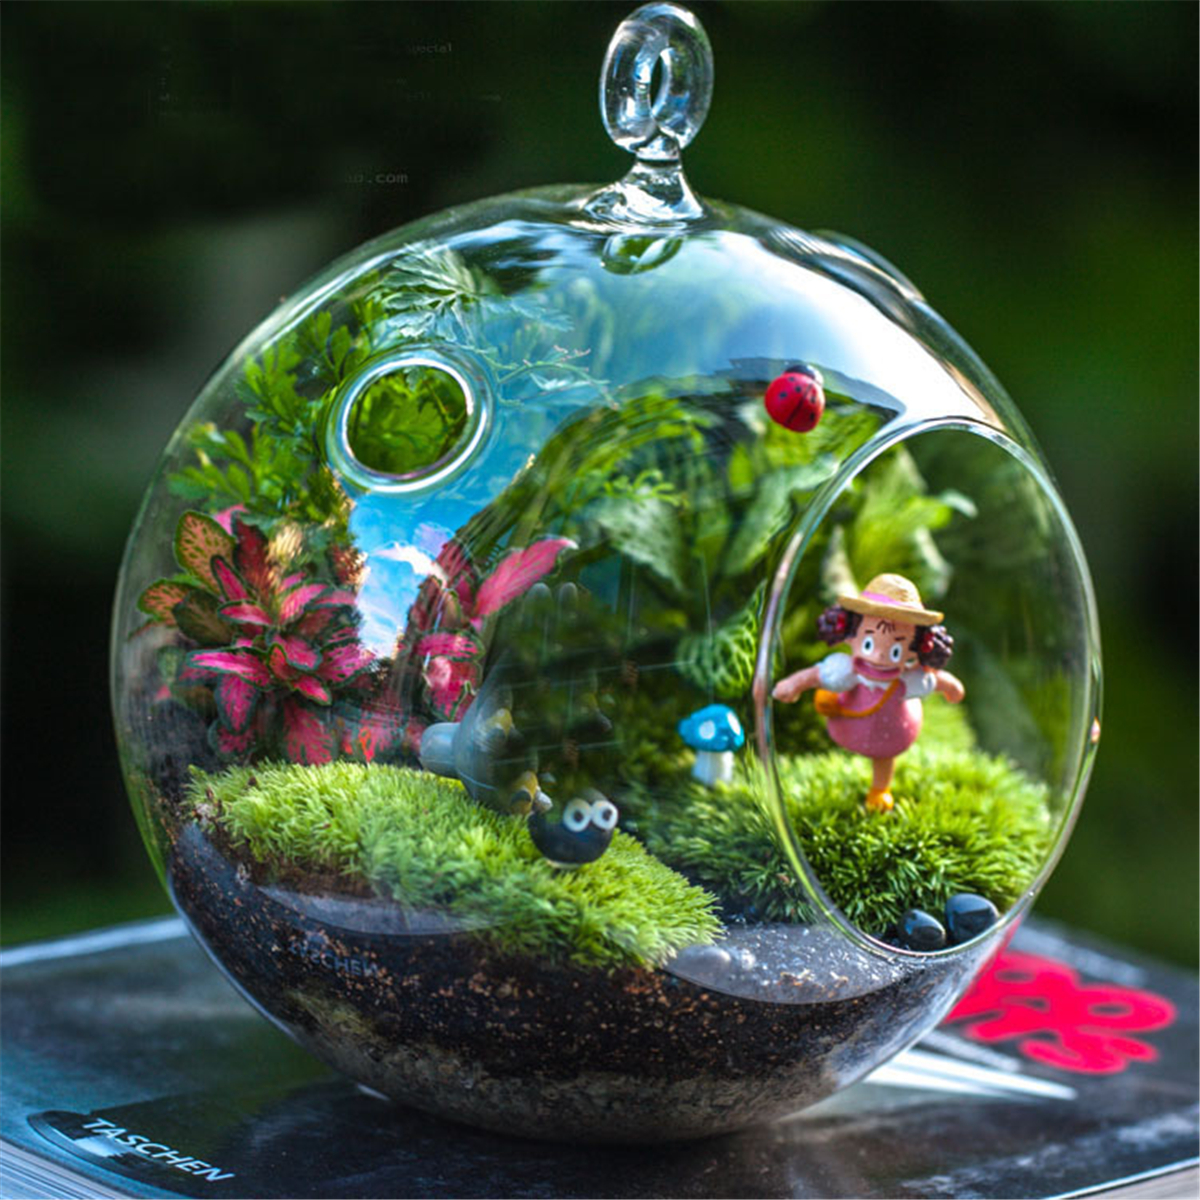 TONSEE_decoration Hanging Glass Ball Vase Flower Plant Pot Terrarium Container Party Wedding Decor